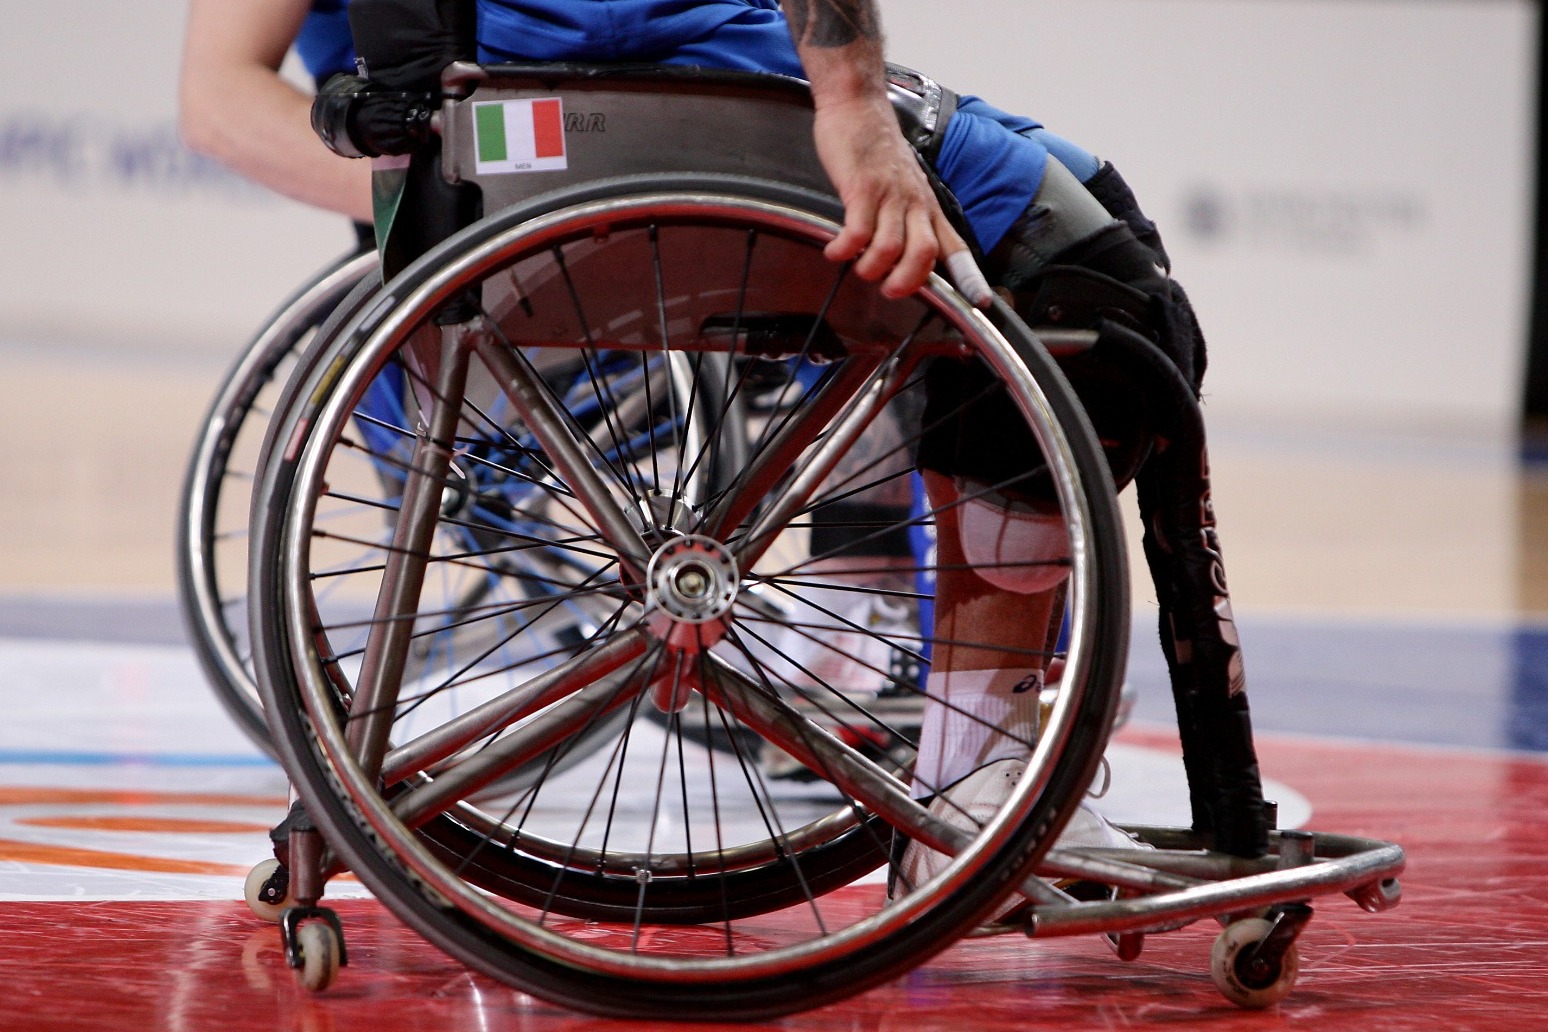 Disabled people feel left out of post-pandemic sporting recovery, report says 